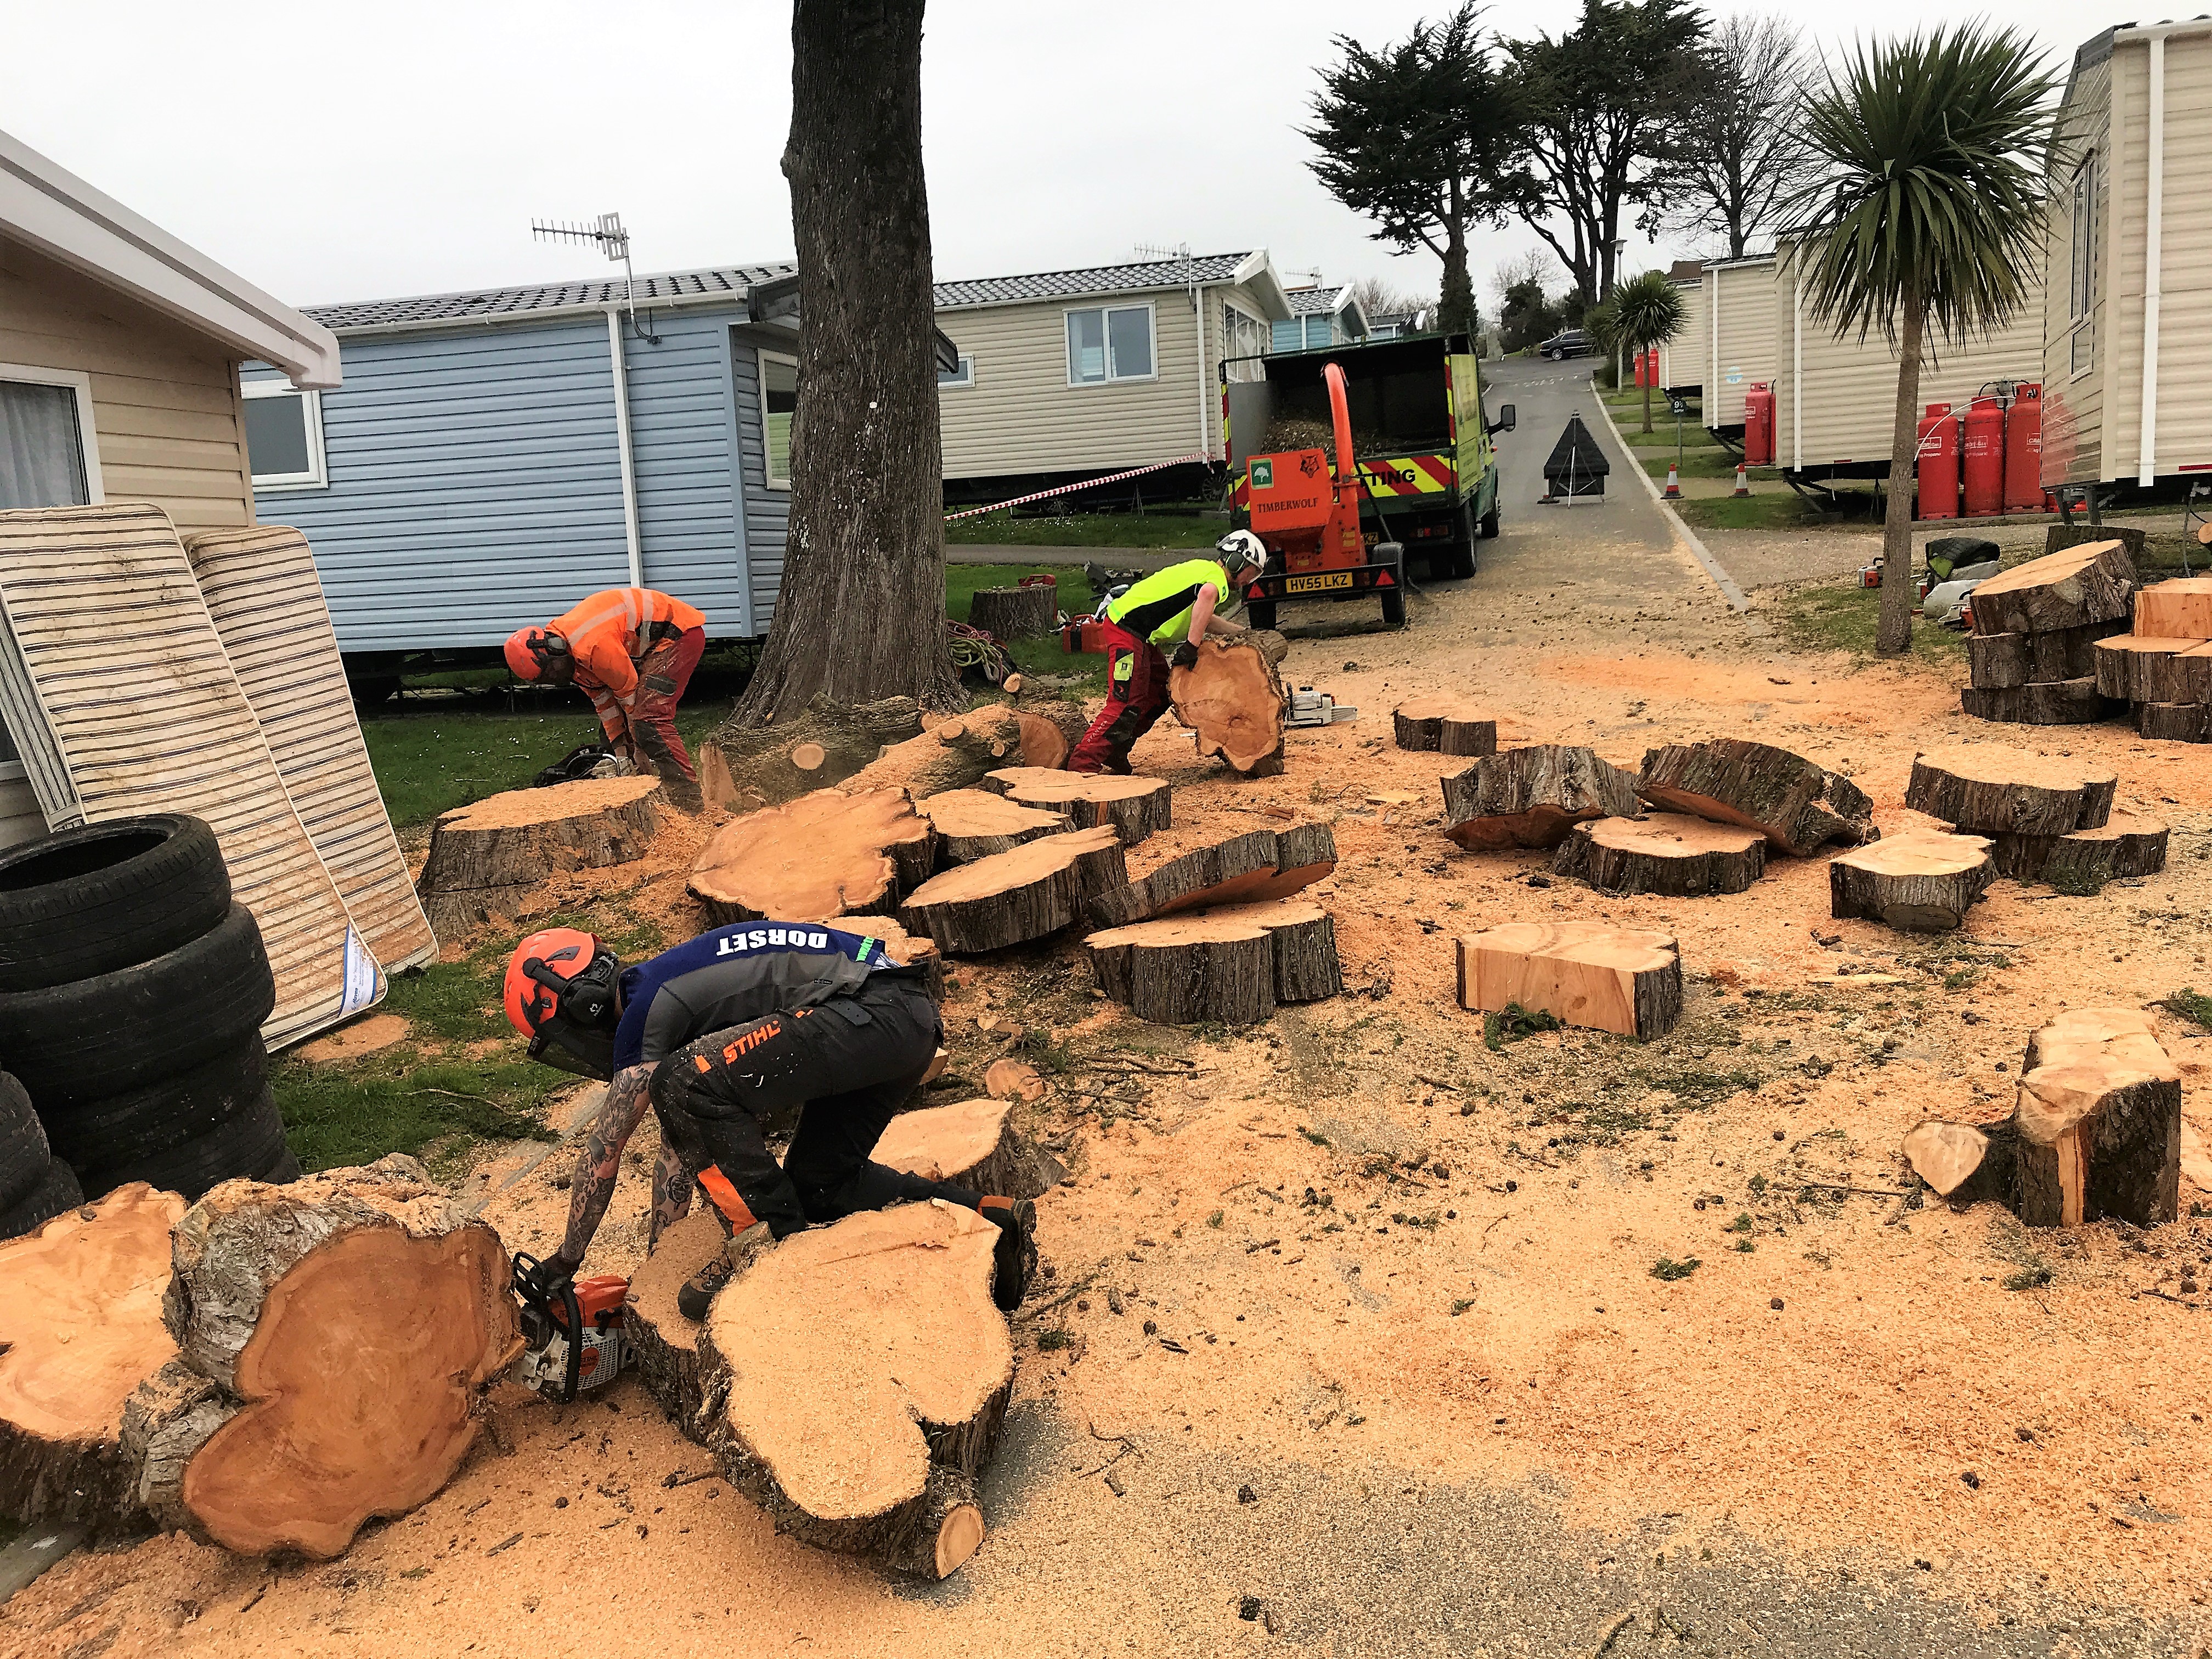 Tree removal in Weymouth, Dorchester, Portland in Dorset - Dorset Treeworx team covering tree felling, tree removal, stump removal services